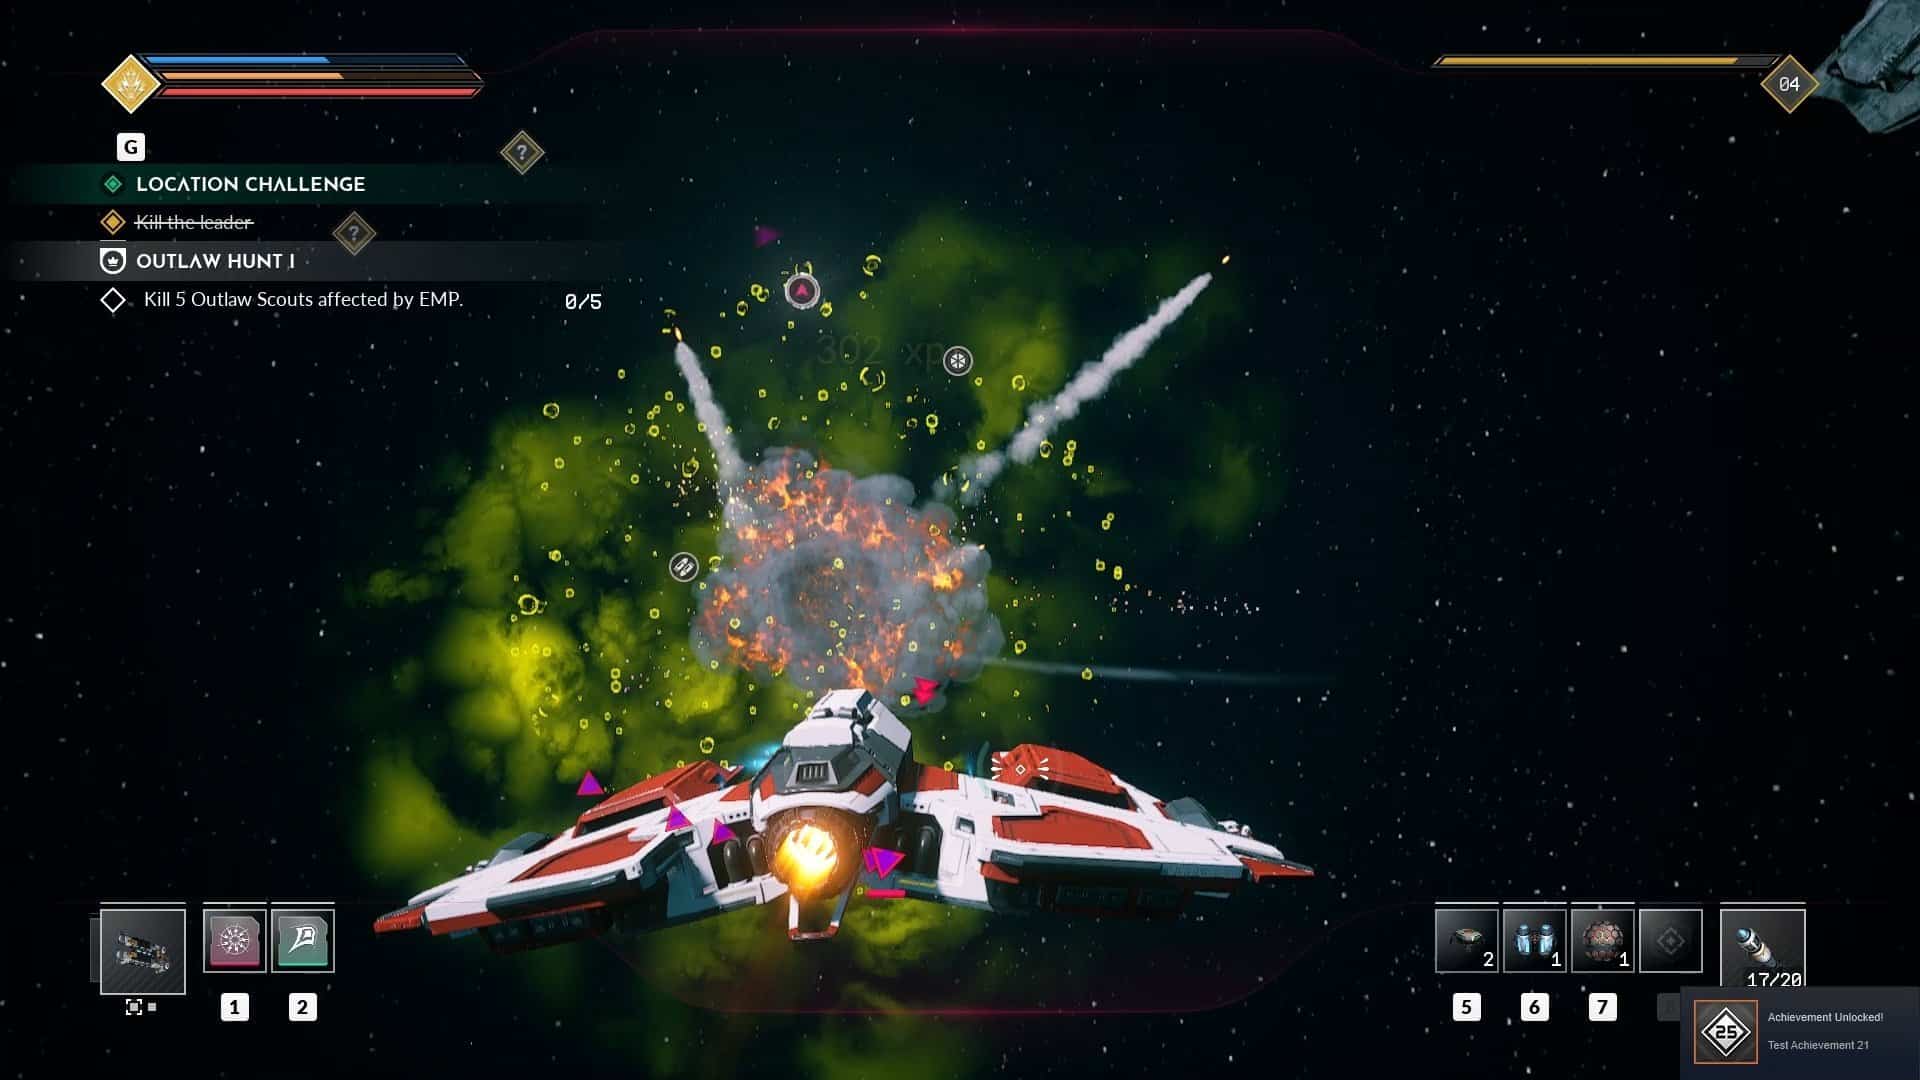 Everspace 2 Review